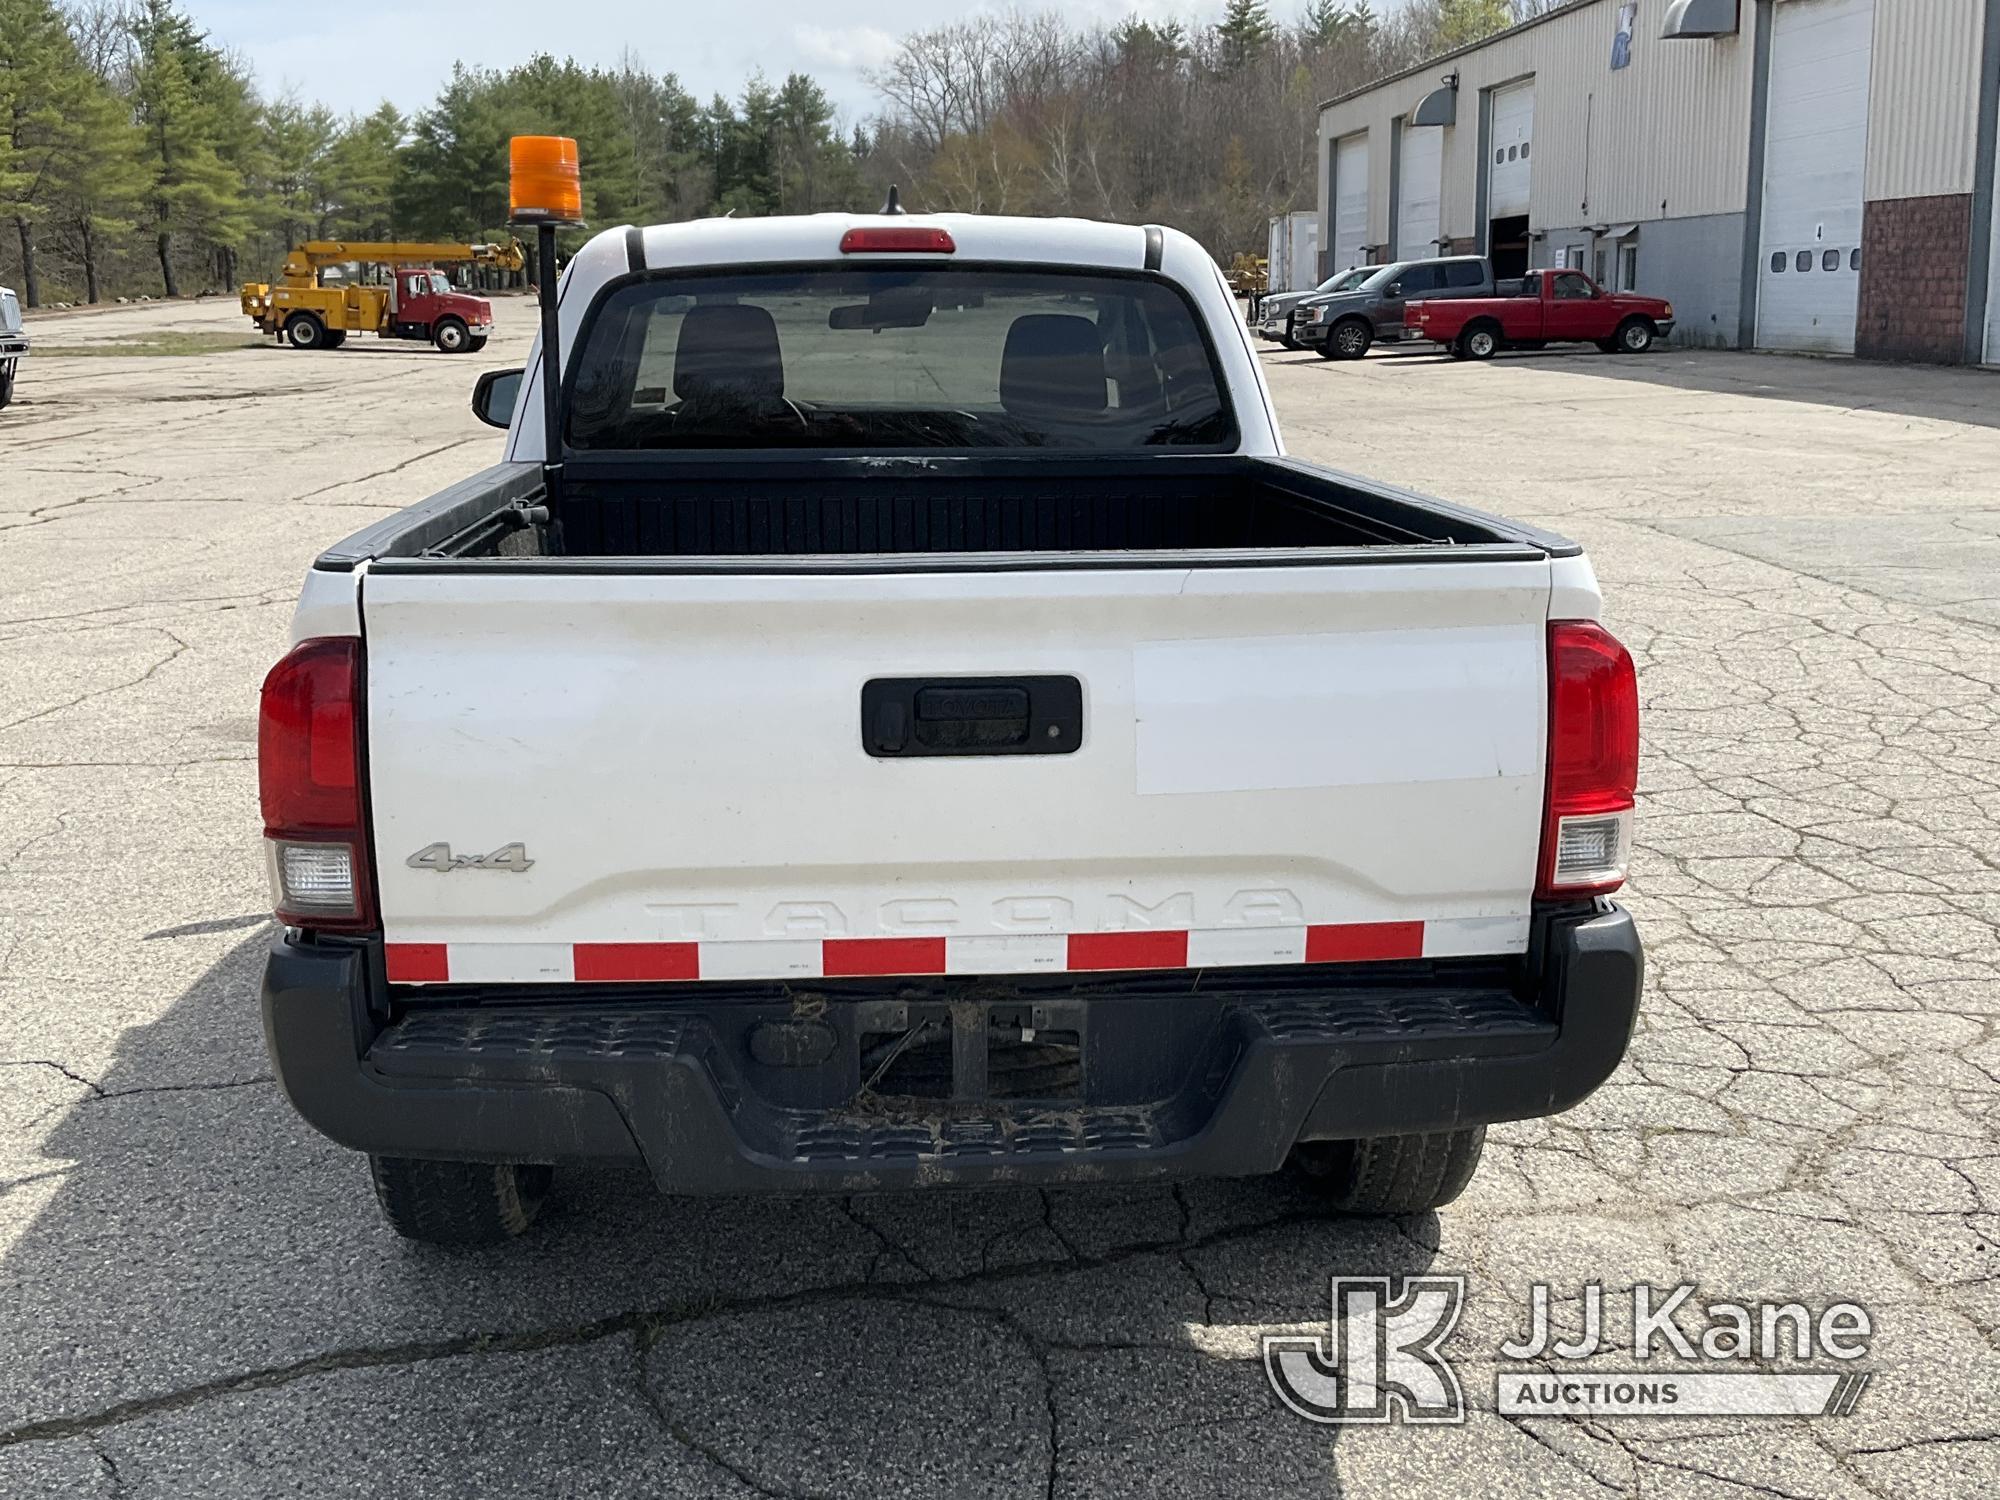 (Wells, ME) 2019 Toyota Tacoma 4x4 Extended-Cab Pickup Truck Runs & Moves) (Body Damage